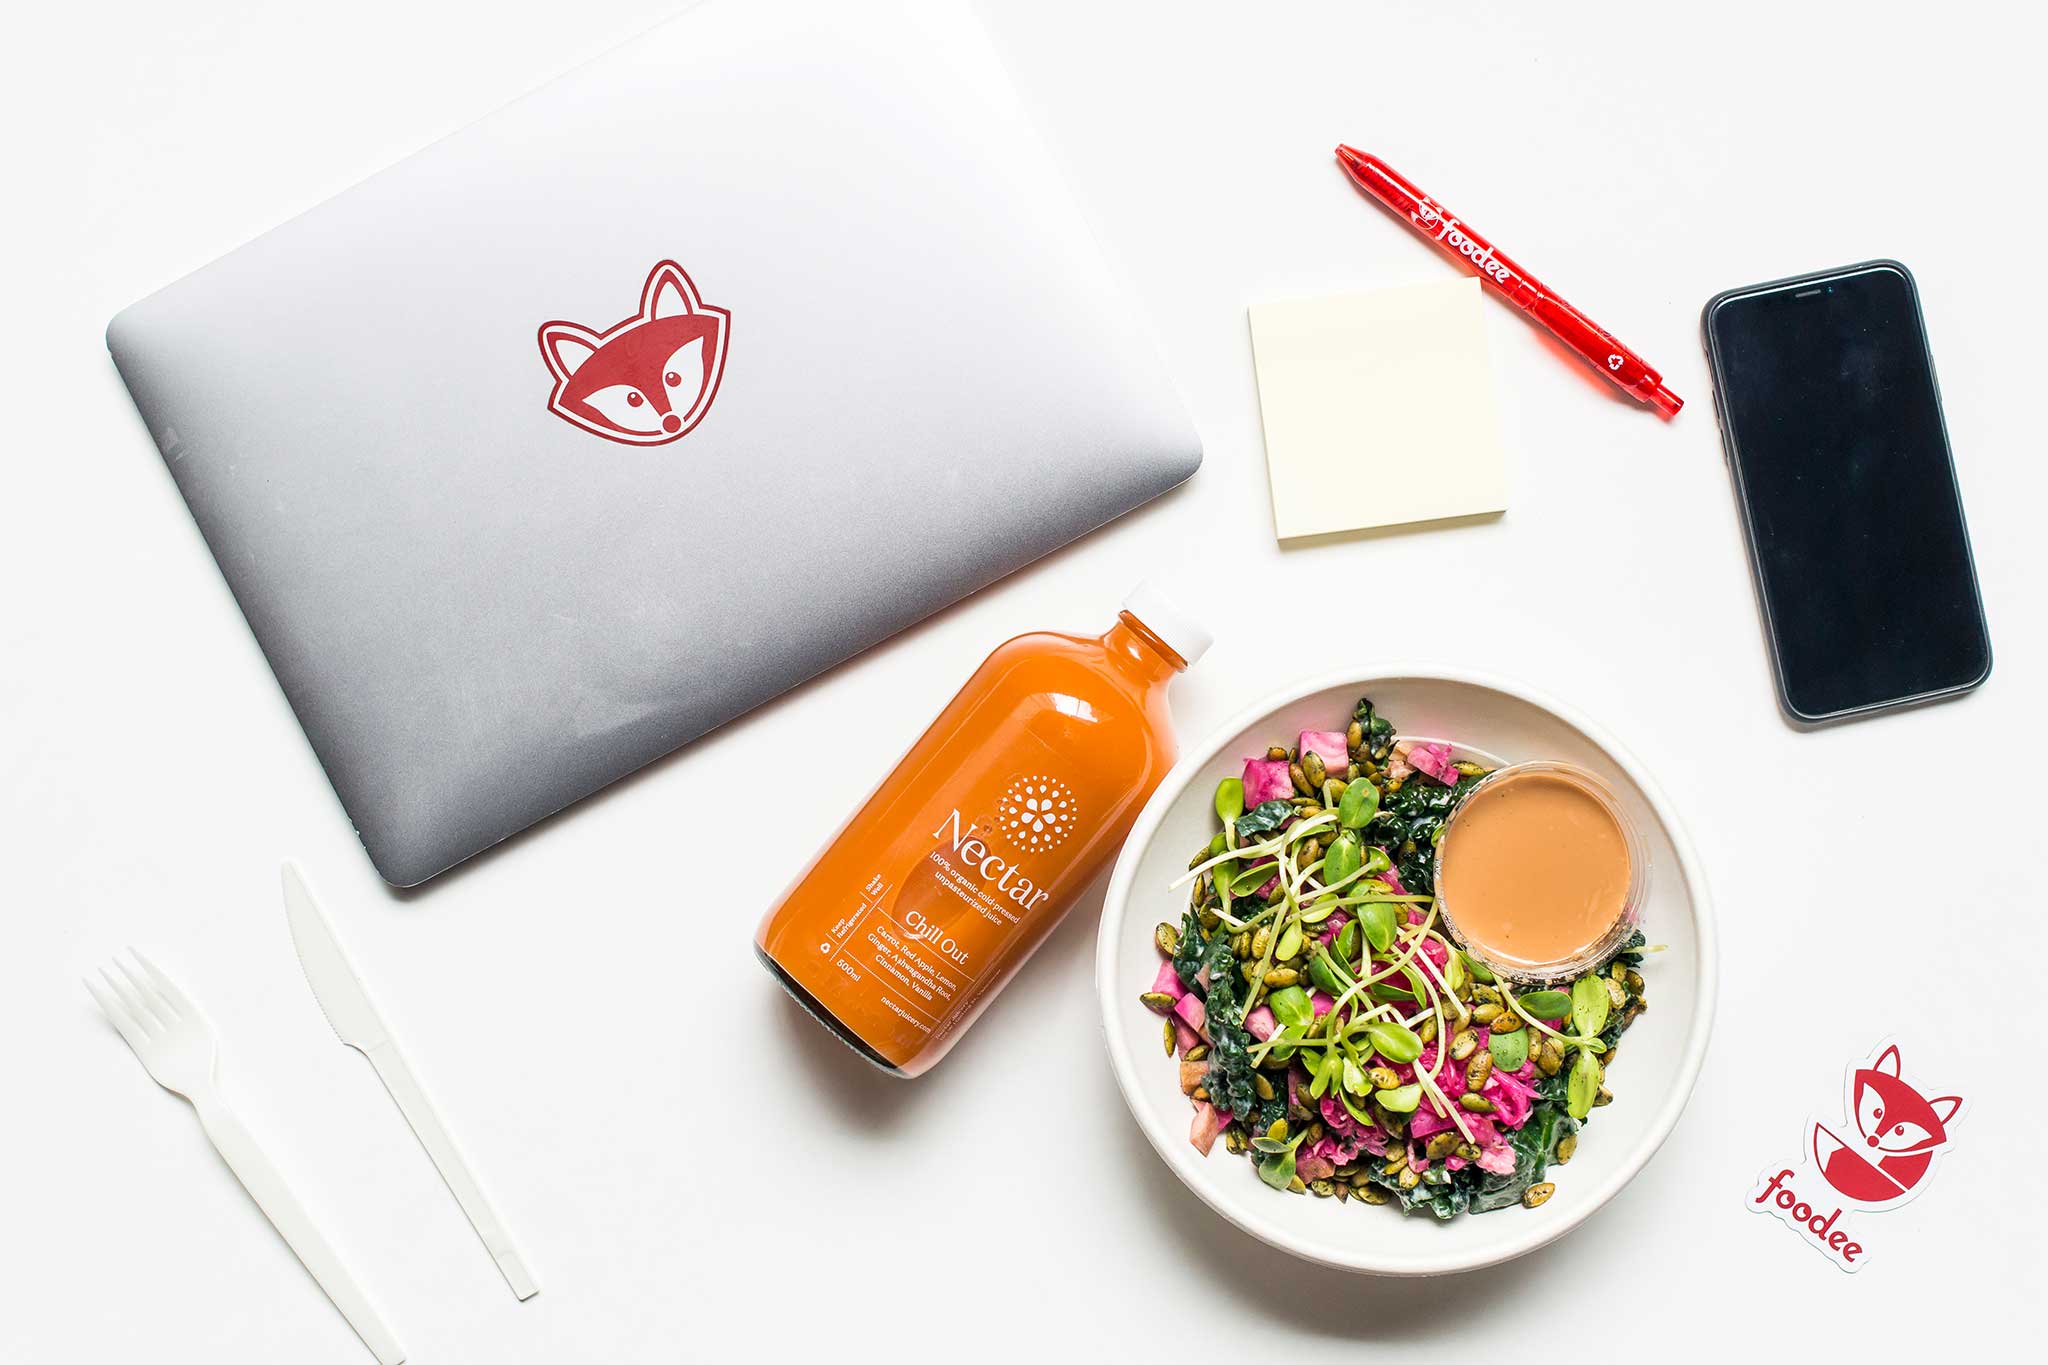 Foodee branded laptop, pen, and sticker, next to a bowl of salad, and orange juice, and a cellphone